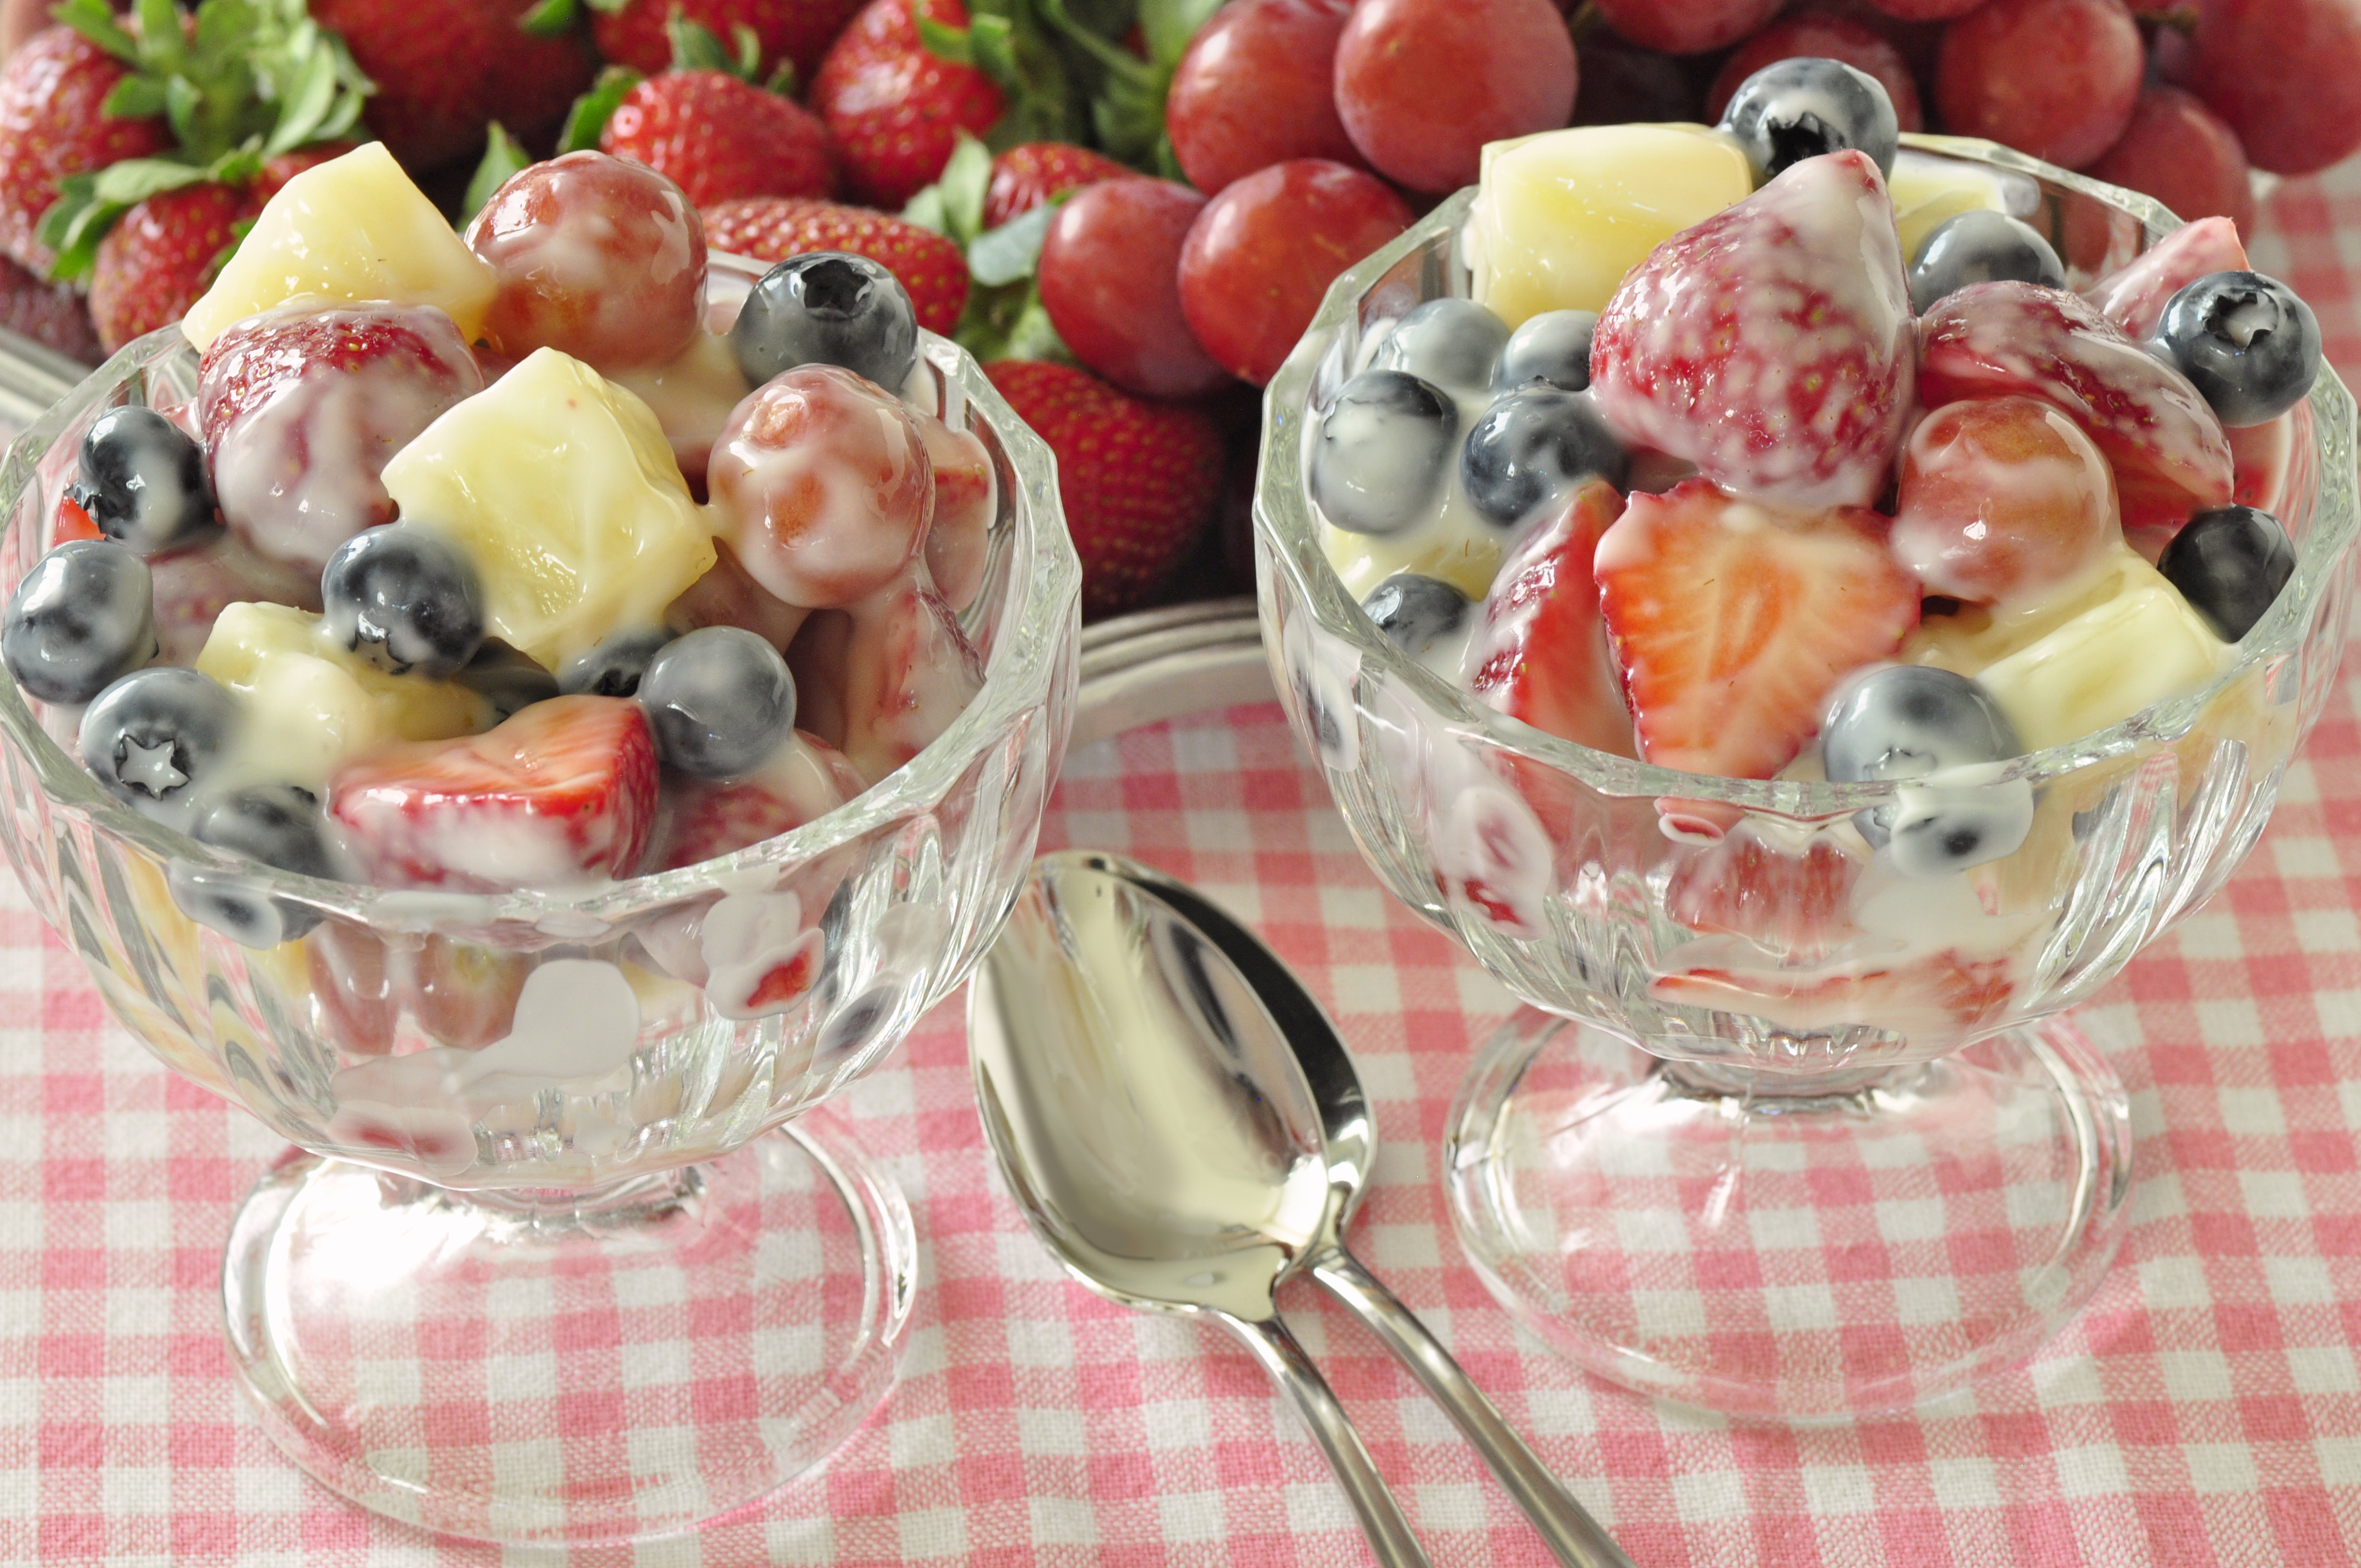 Fruit Salad for two served in glass